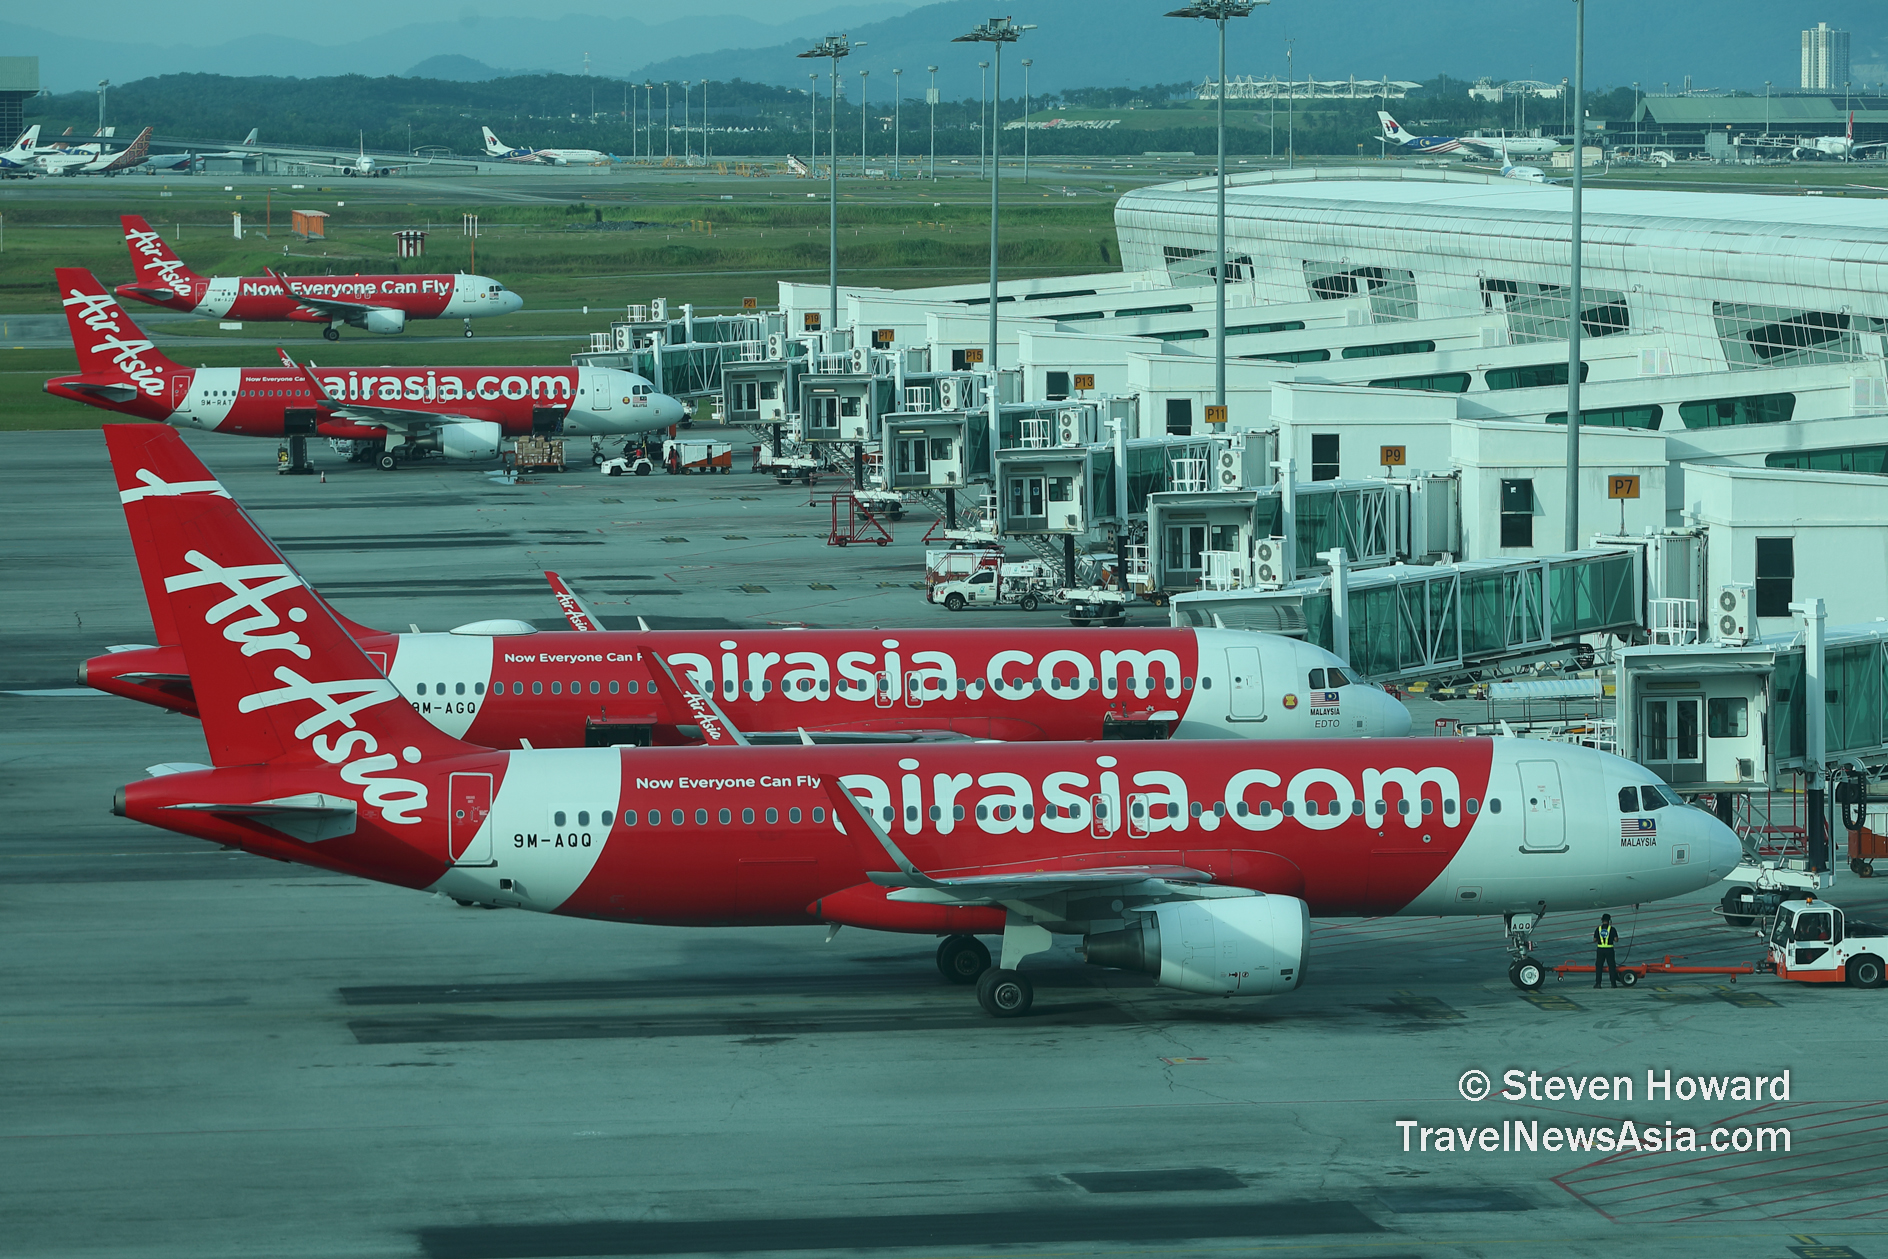 AirAsia Malaysia A320s at klia2. Picture by Steven Howard of TravelNewsAsia.com Click to enlarge.